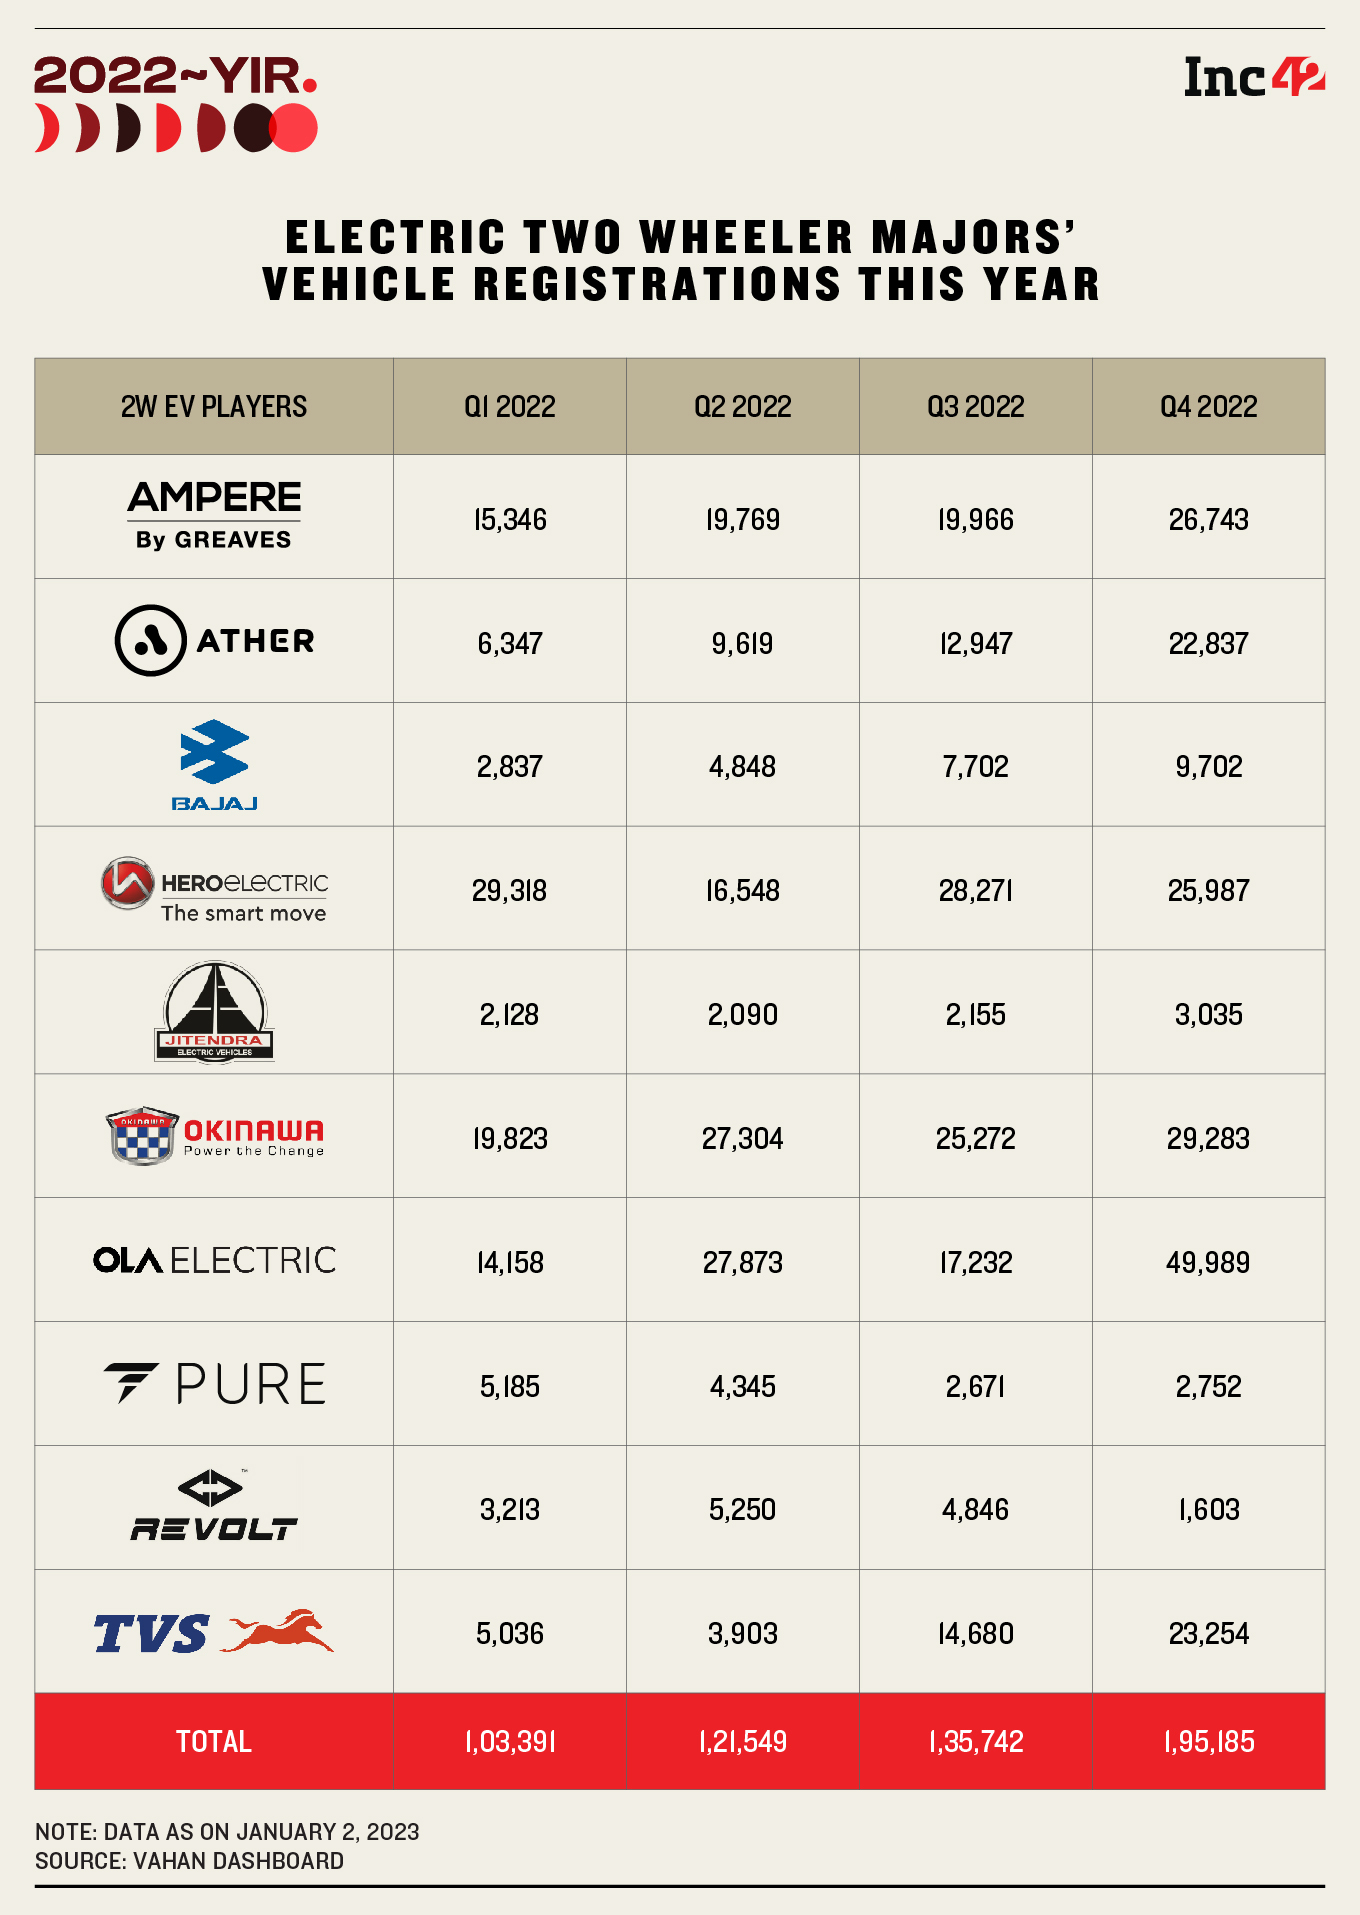 Electric Two Wheeler Majors’ Vehicle Registrations This Year